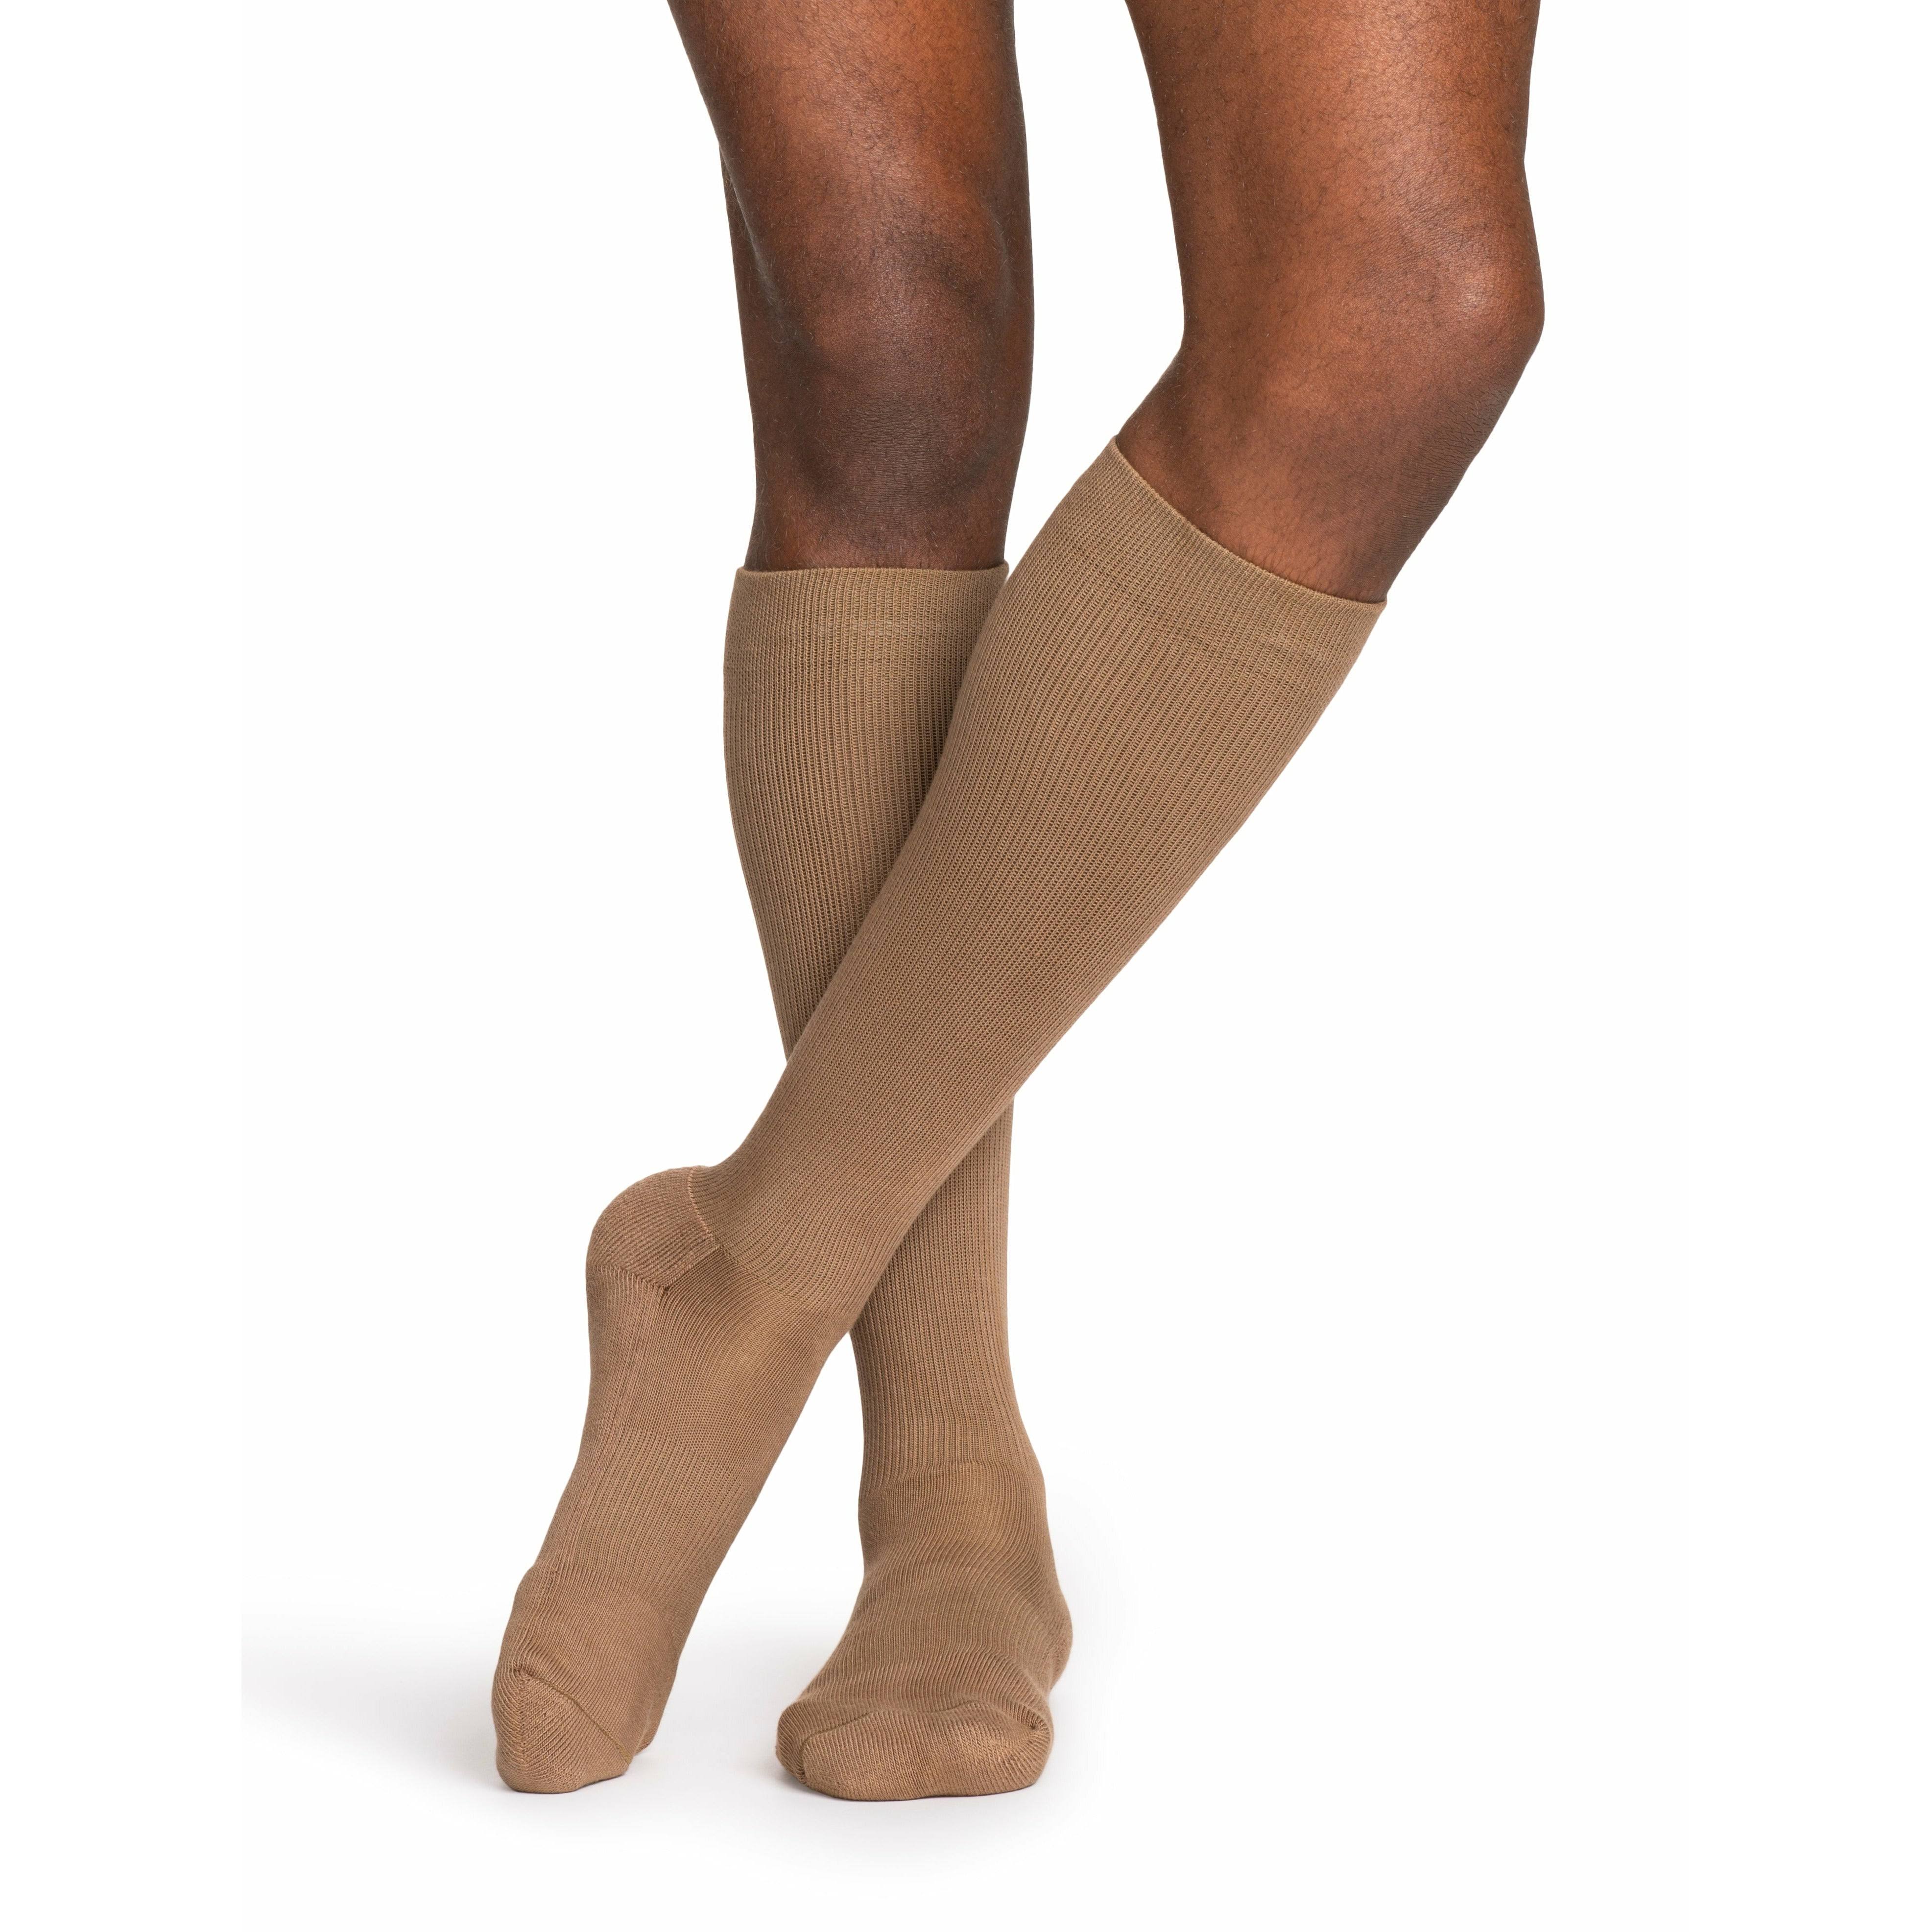 Sigvaris Women's Casual Cotton Support Therapy Socks - 15-20mmHg, Khaki, Size B